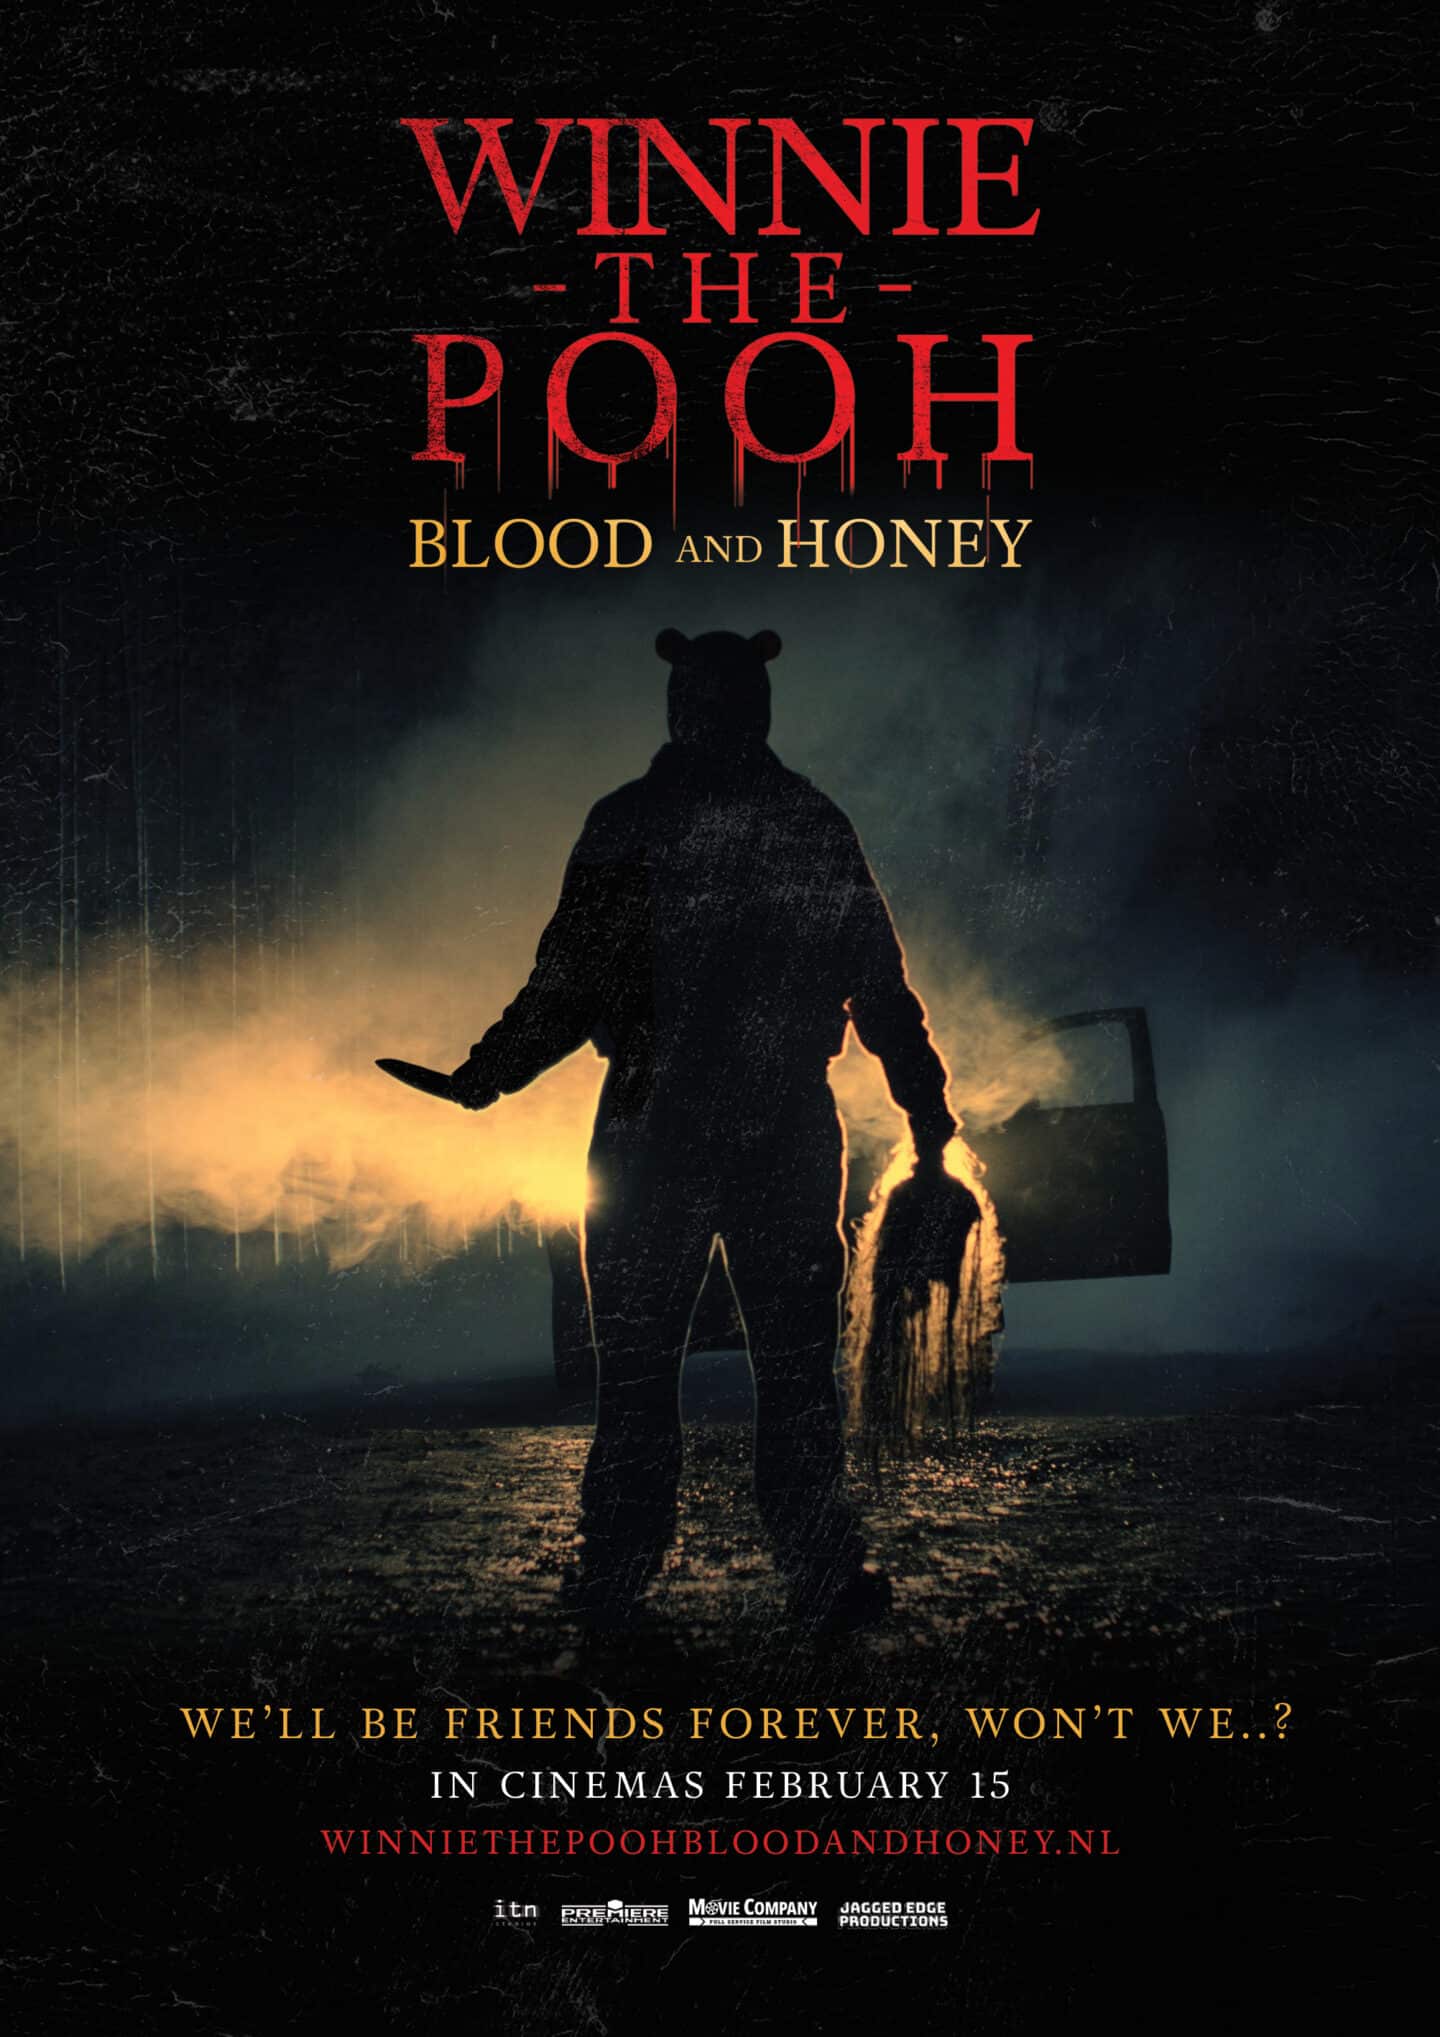 Winnie The Pooh Blood and Honey – Teaser Poster